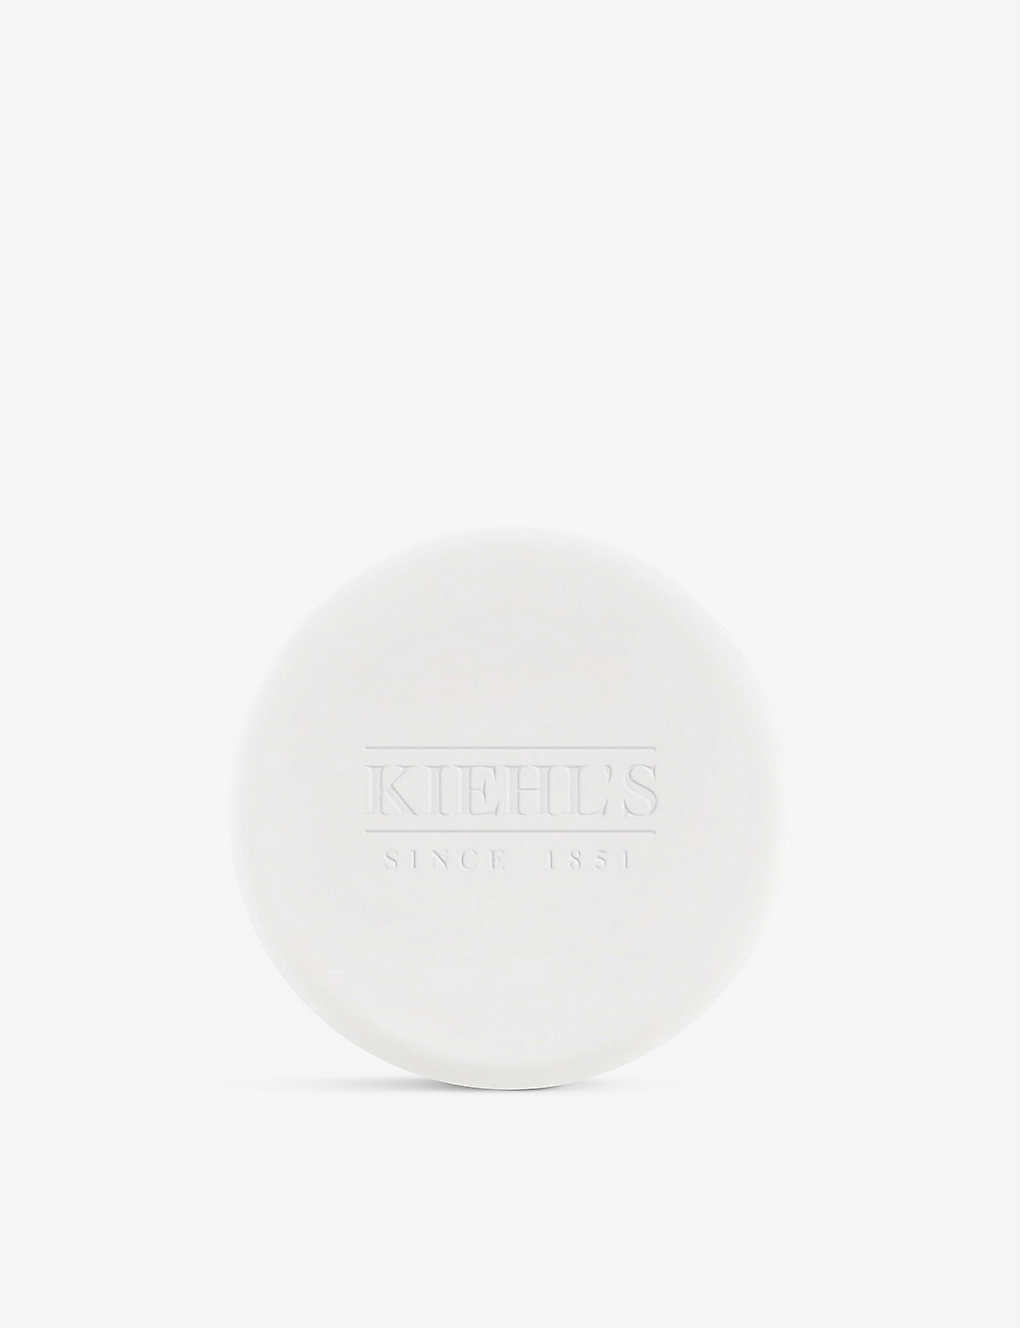 Kiehl's Since 1851 Ultra Facial Hydrating Concentrated Cleansing Bar 100g